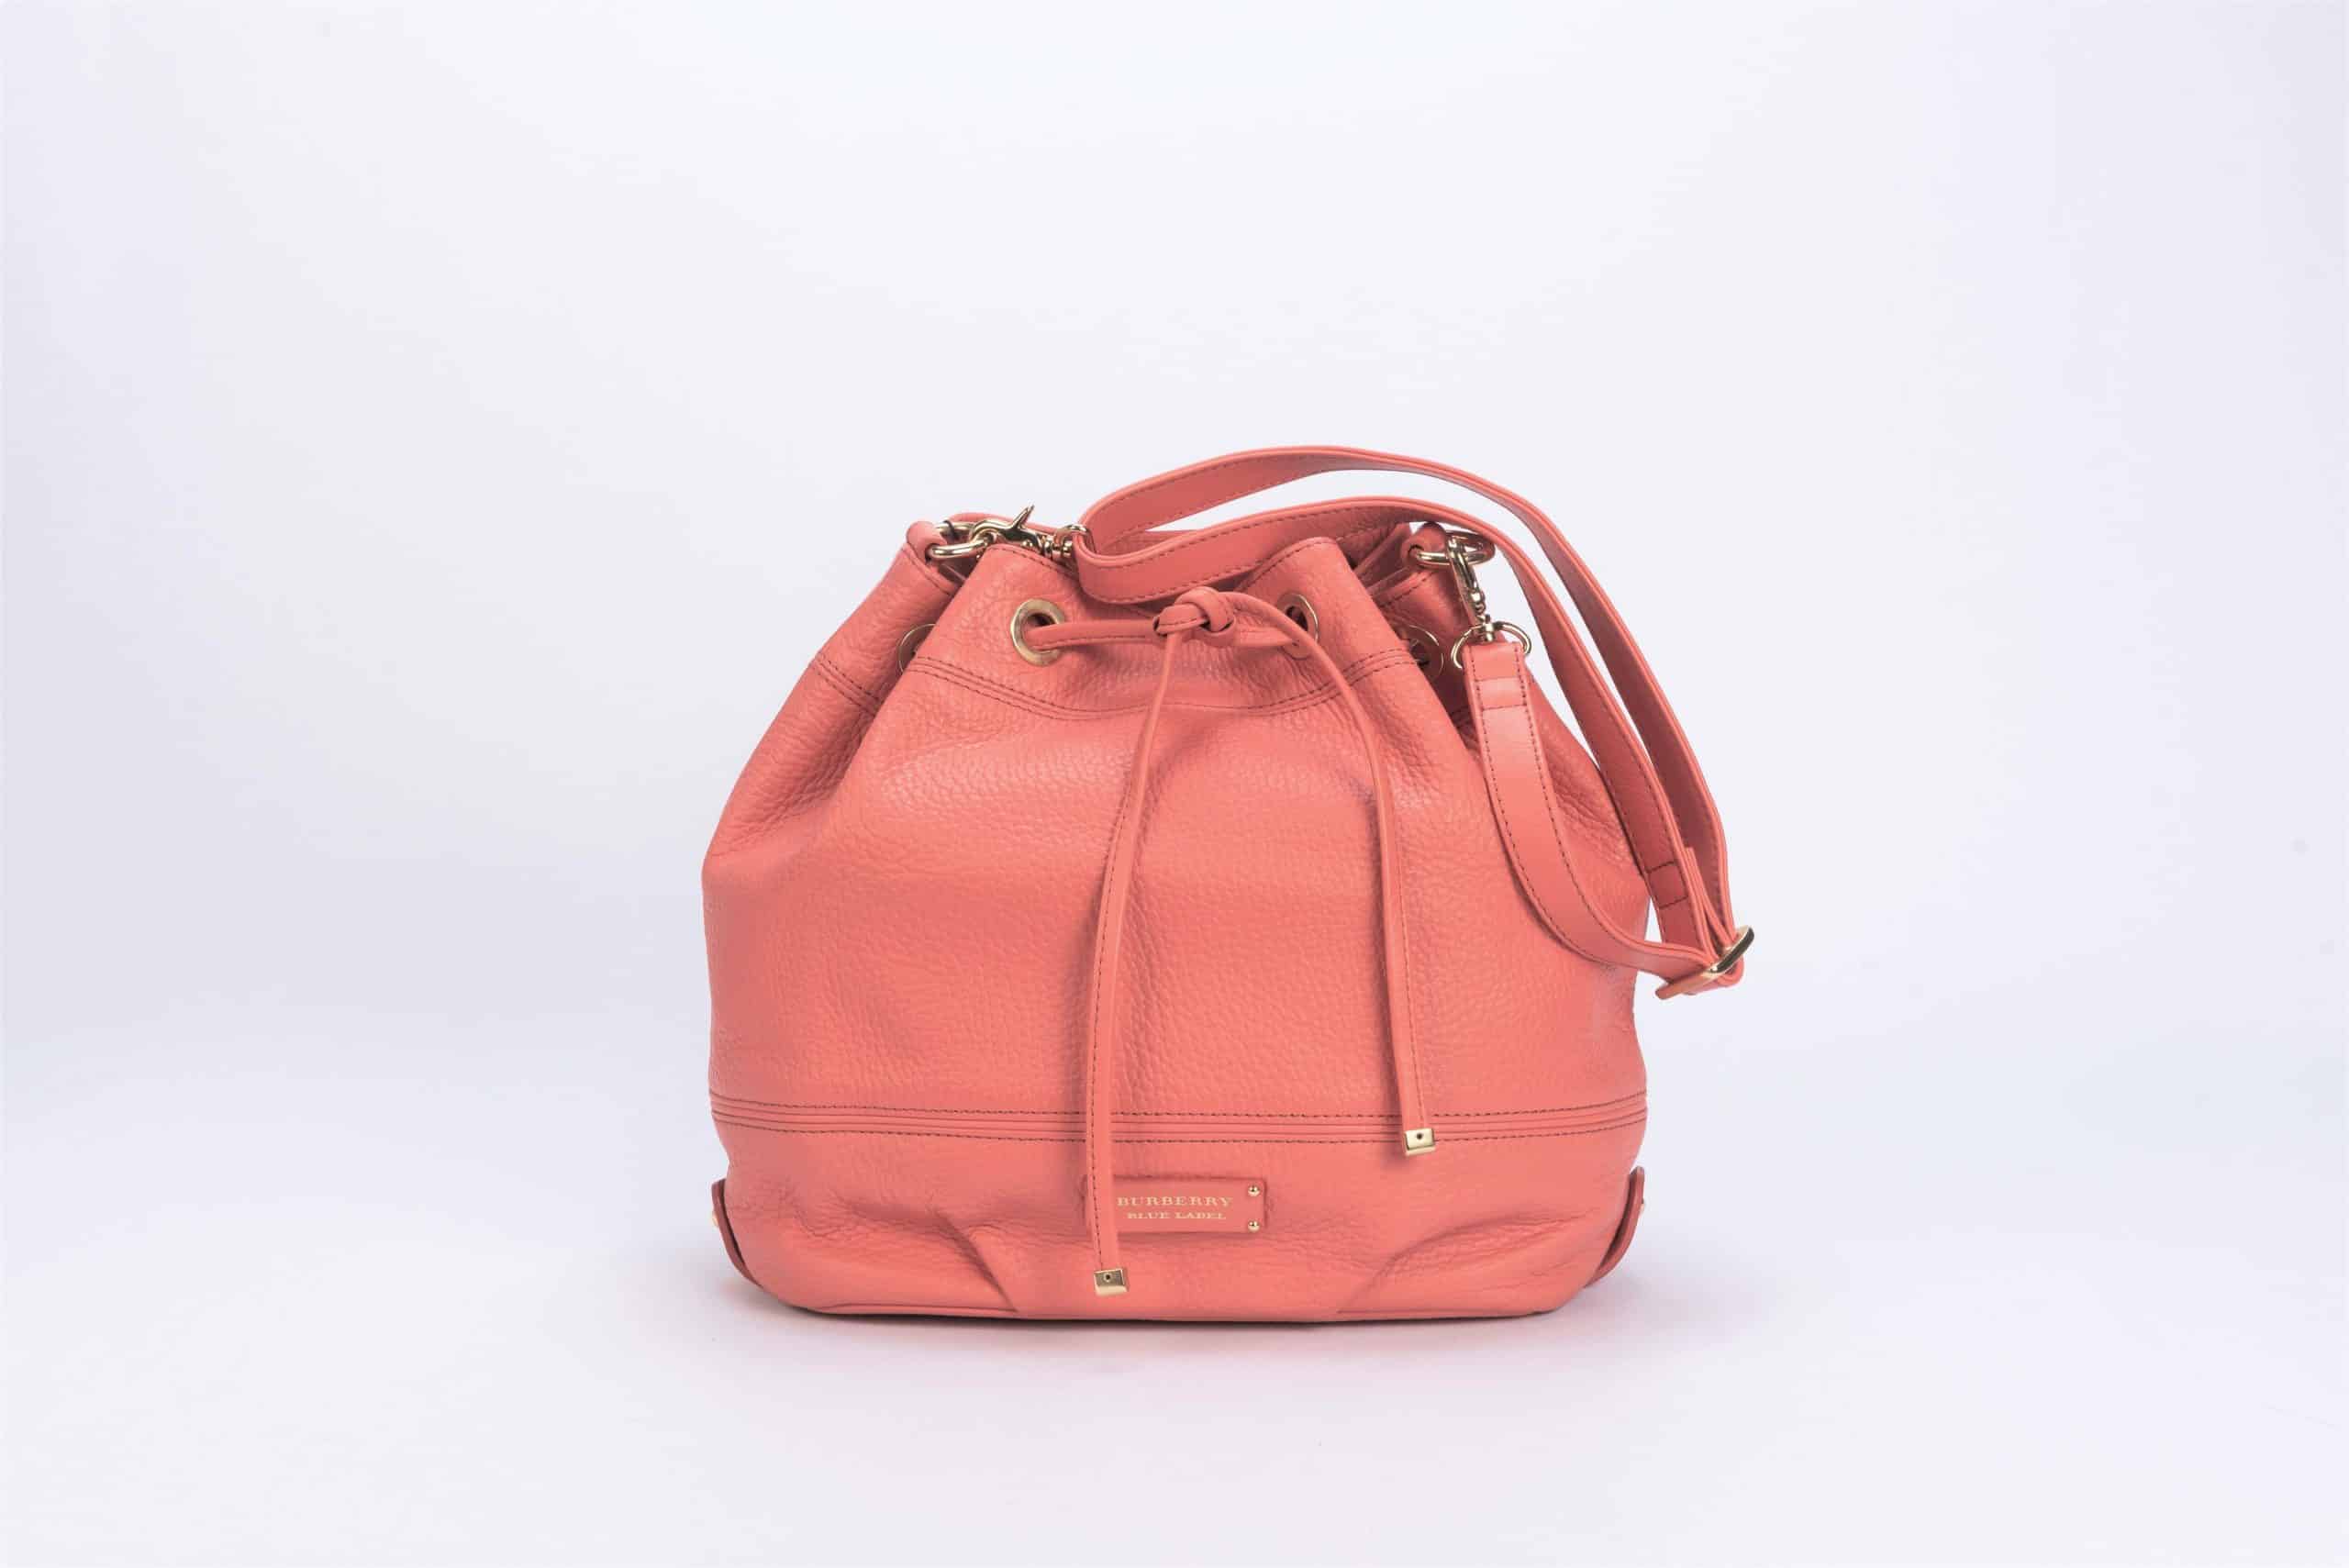 Burberry Blue Label Grain Sling Bag in Coral Peach - 1